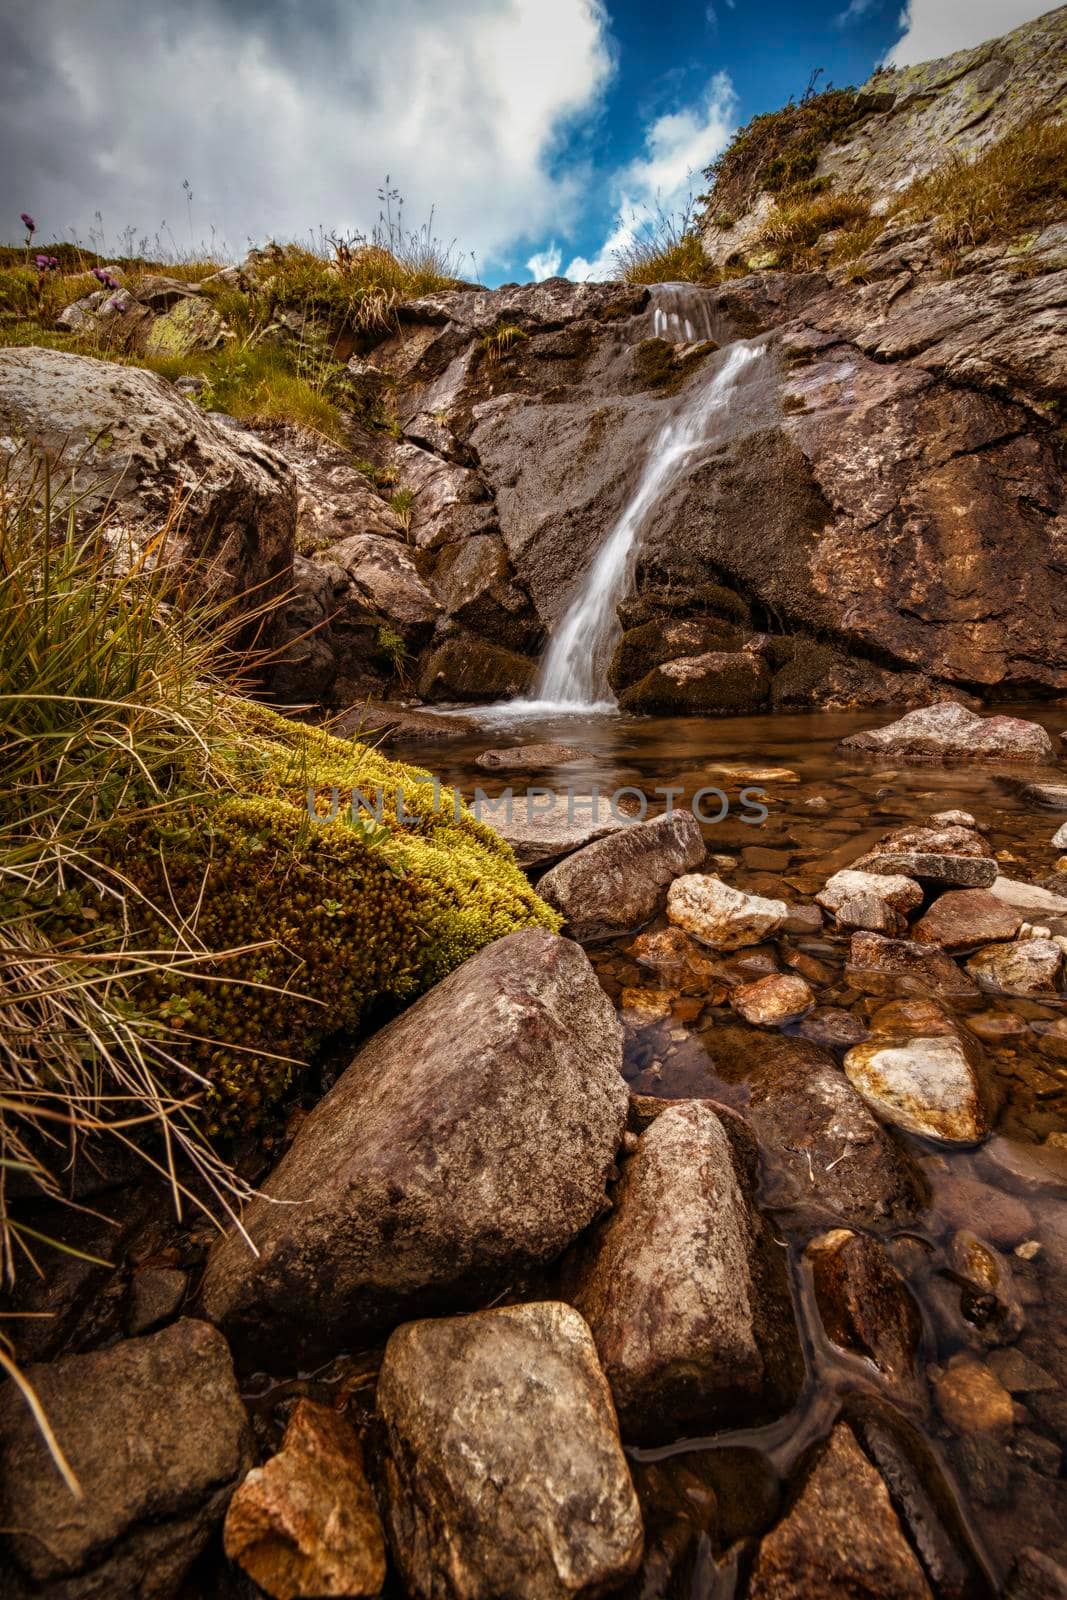 a beautiful mountain landscape with a brook and a small waterfall